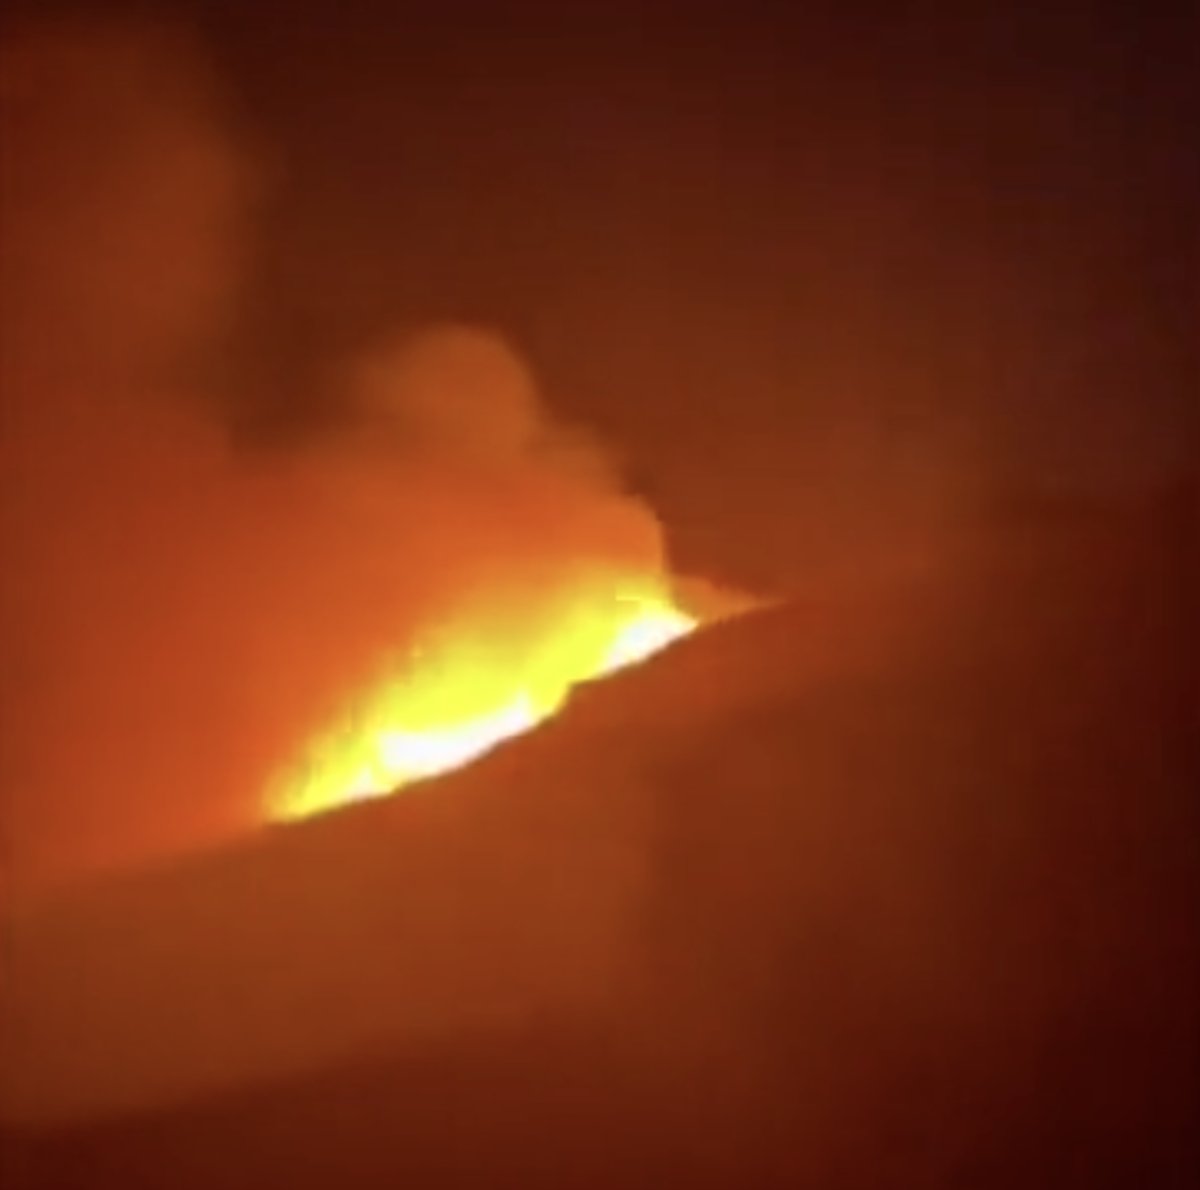 A forest fire broke out on the Italian island of Pantelleria #2